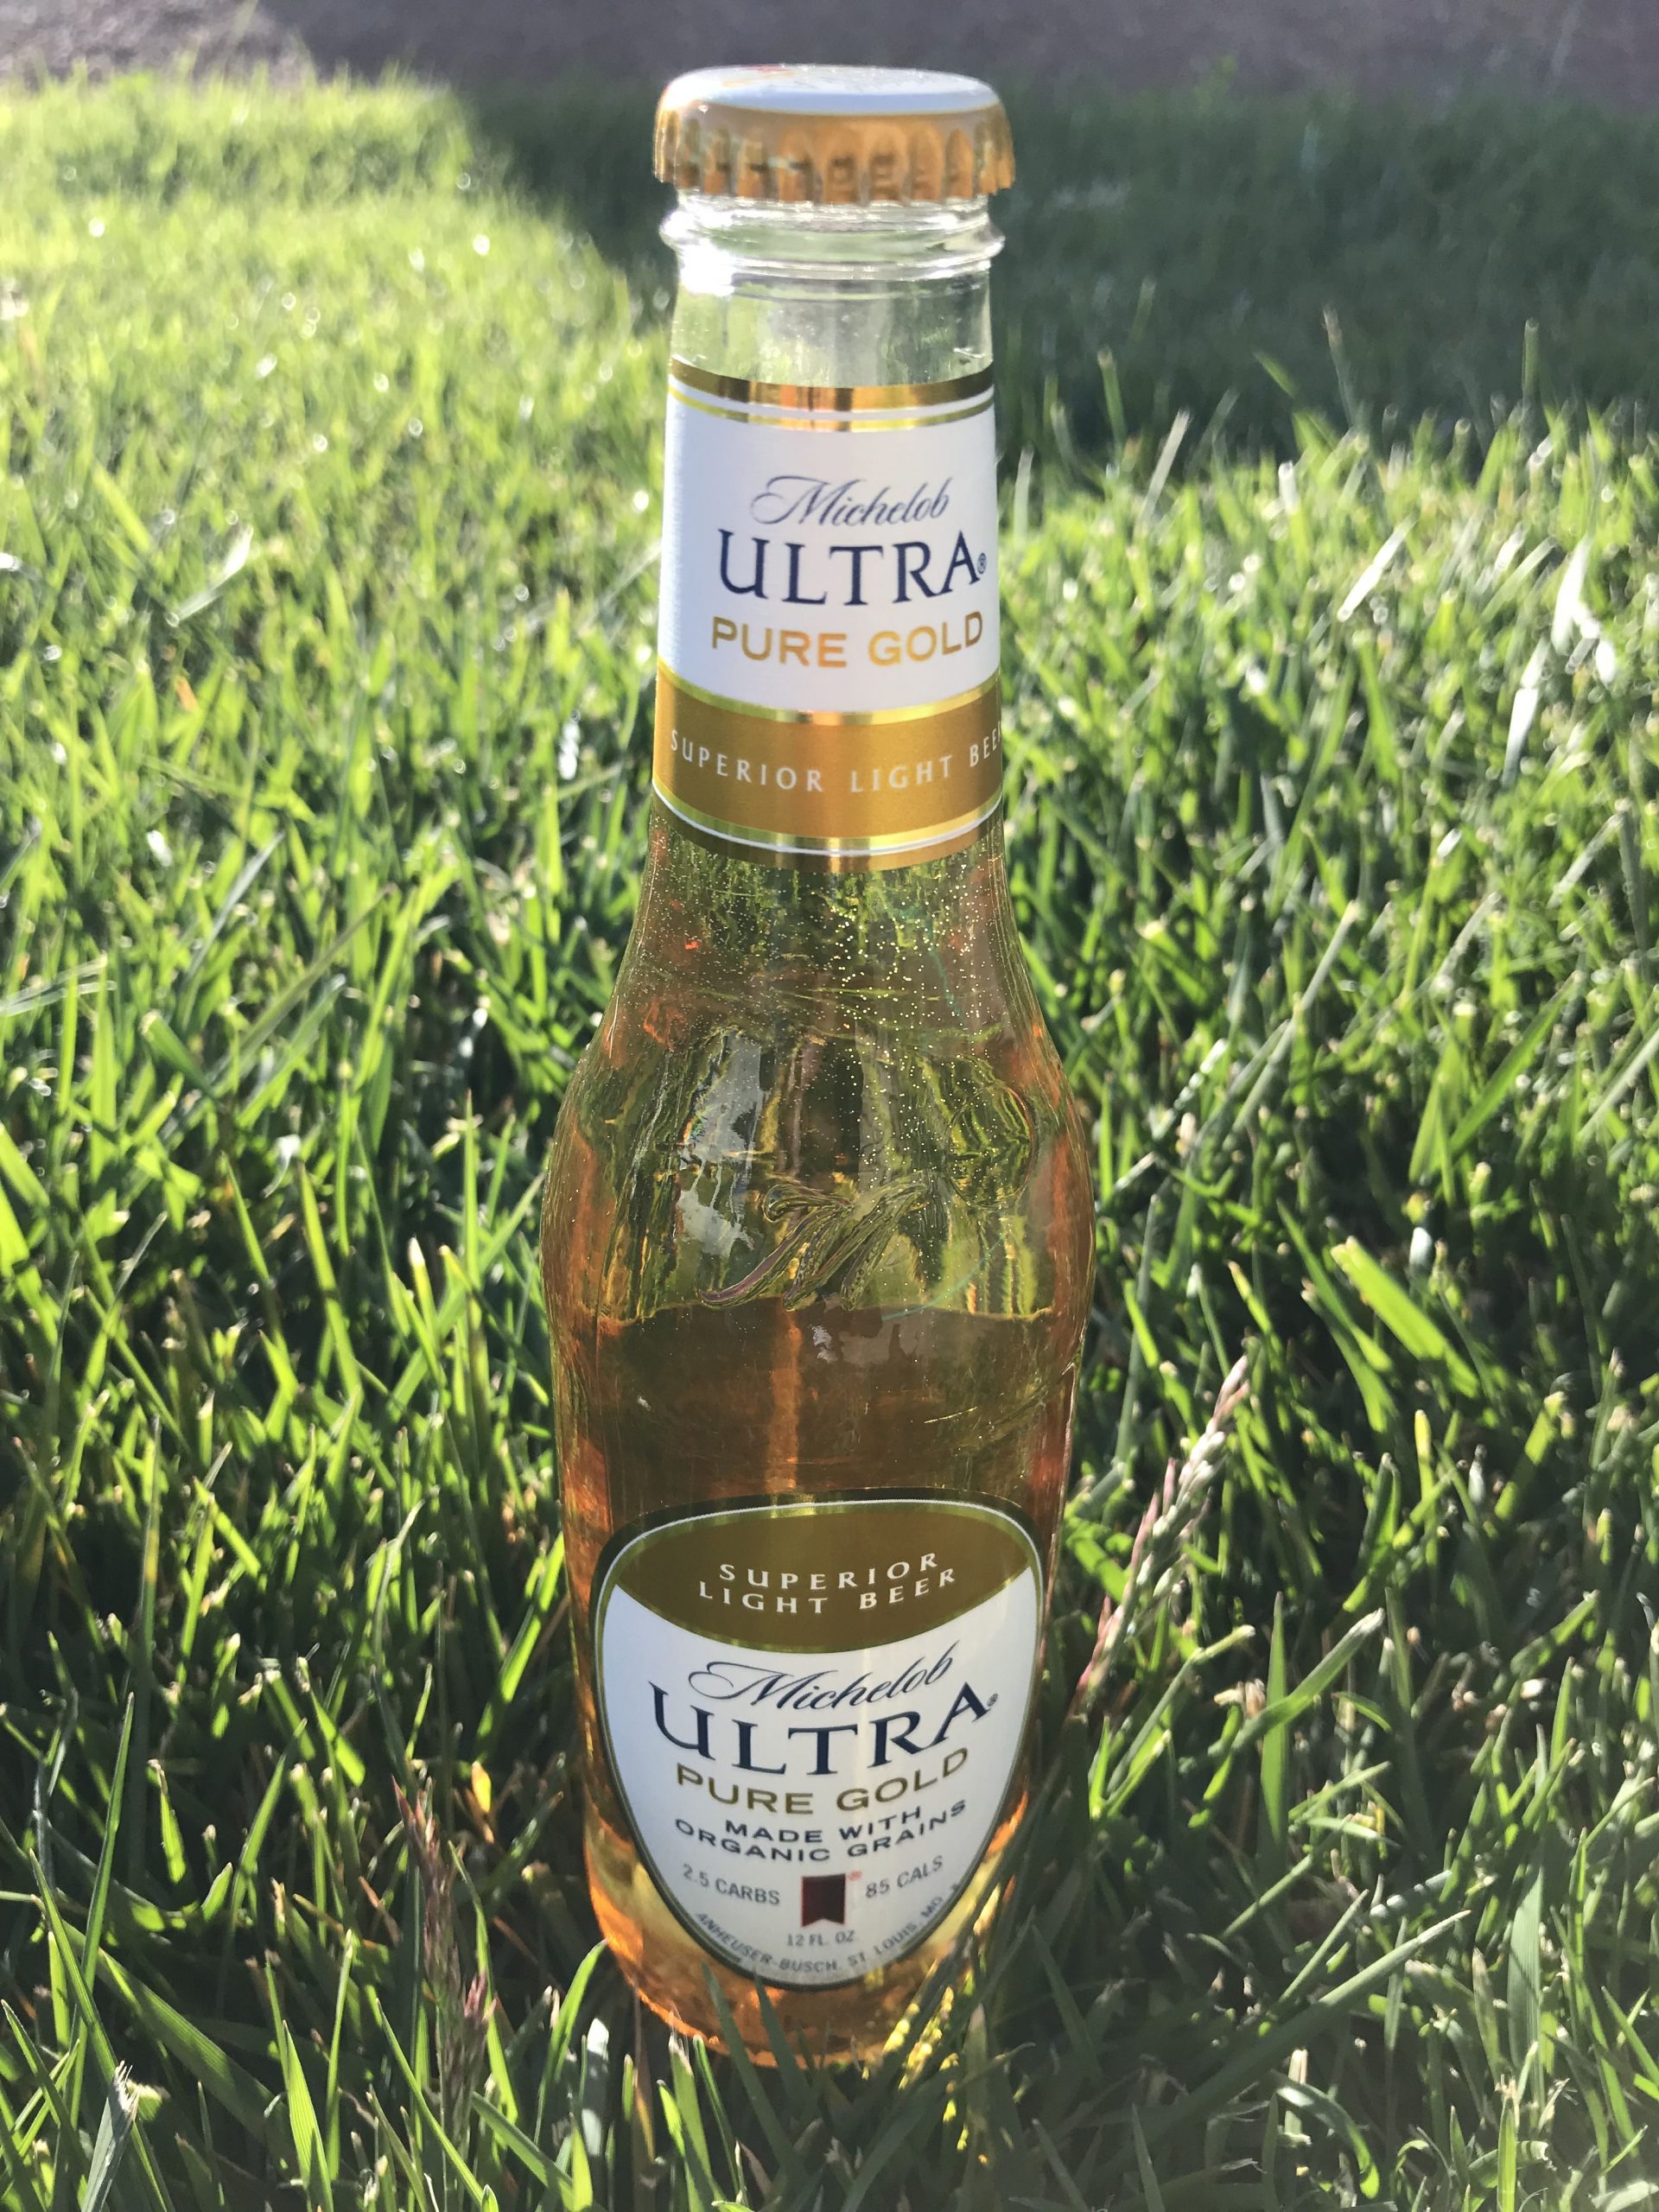 Is Michelob Ultra Pure Gold Gluten Free